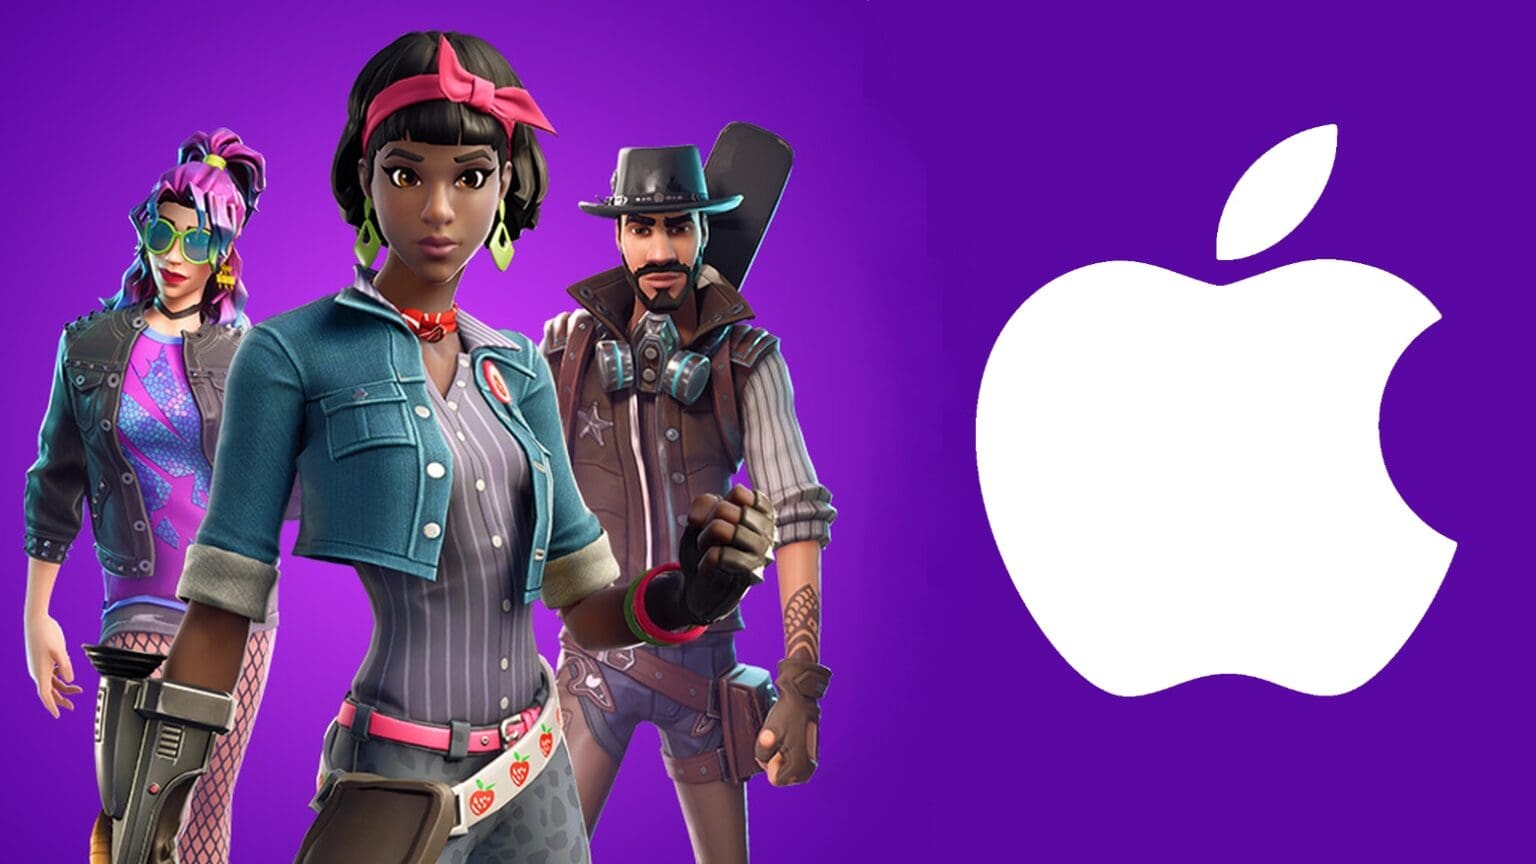 Epic Games v. Apple is just getting started